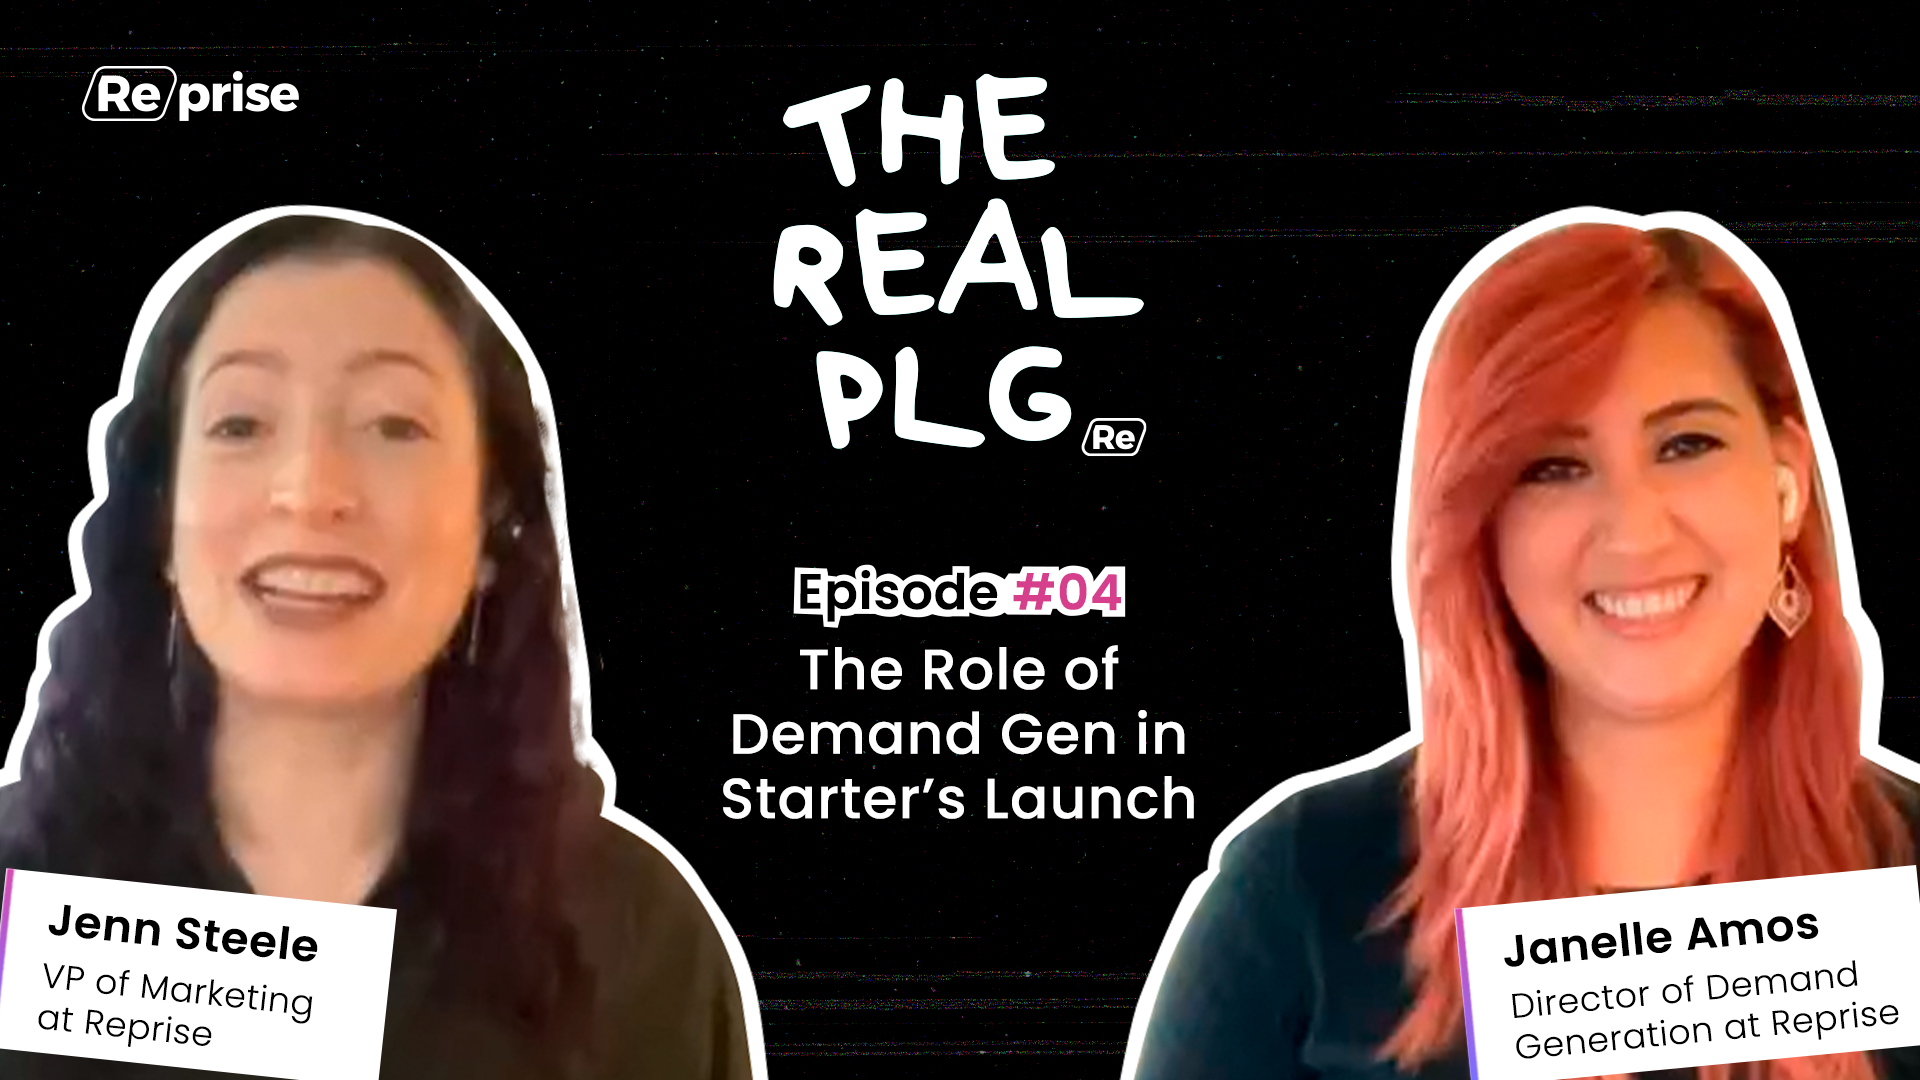 #TheRealPLG – EP 04 | The Role of Demand Gen in Starter’s Launch